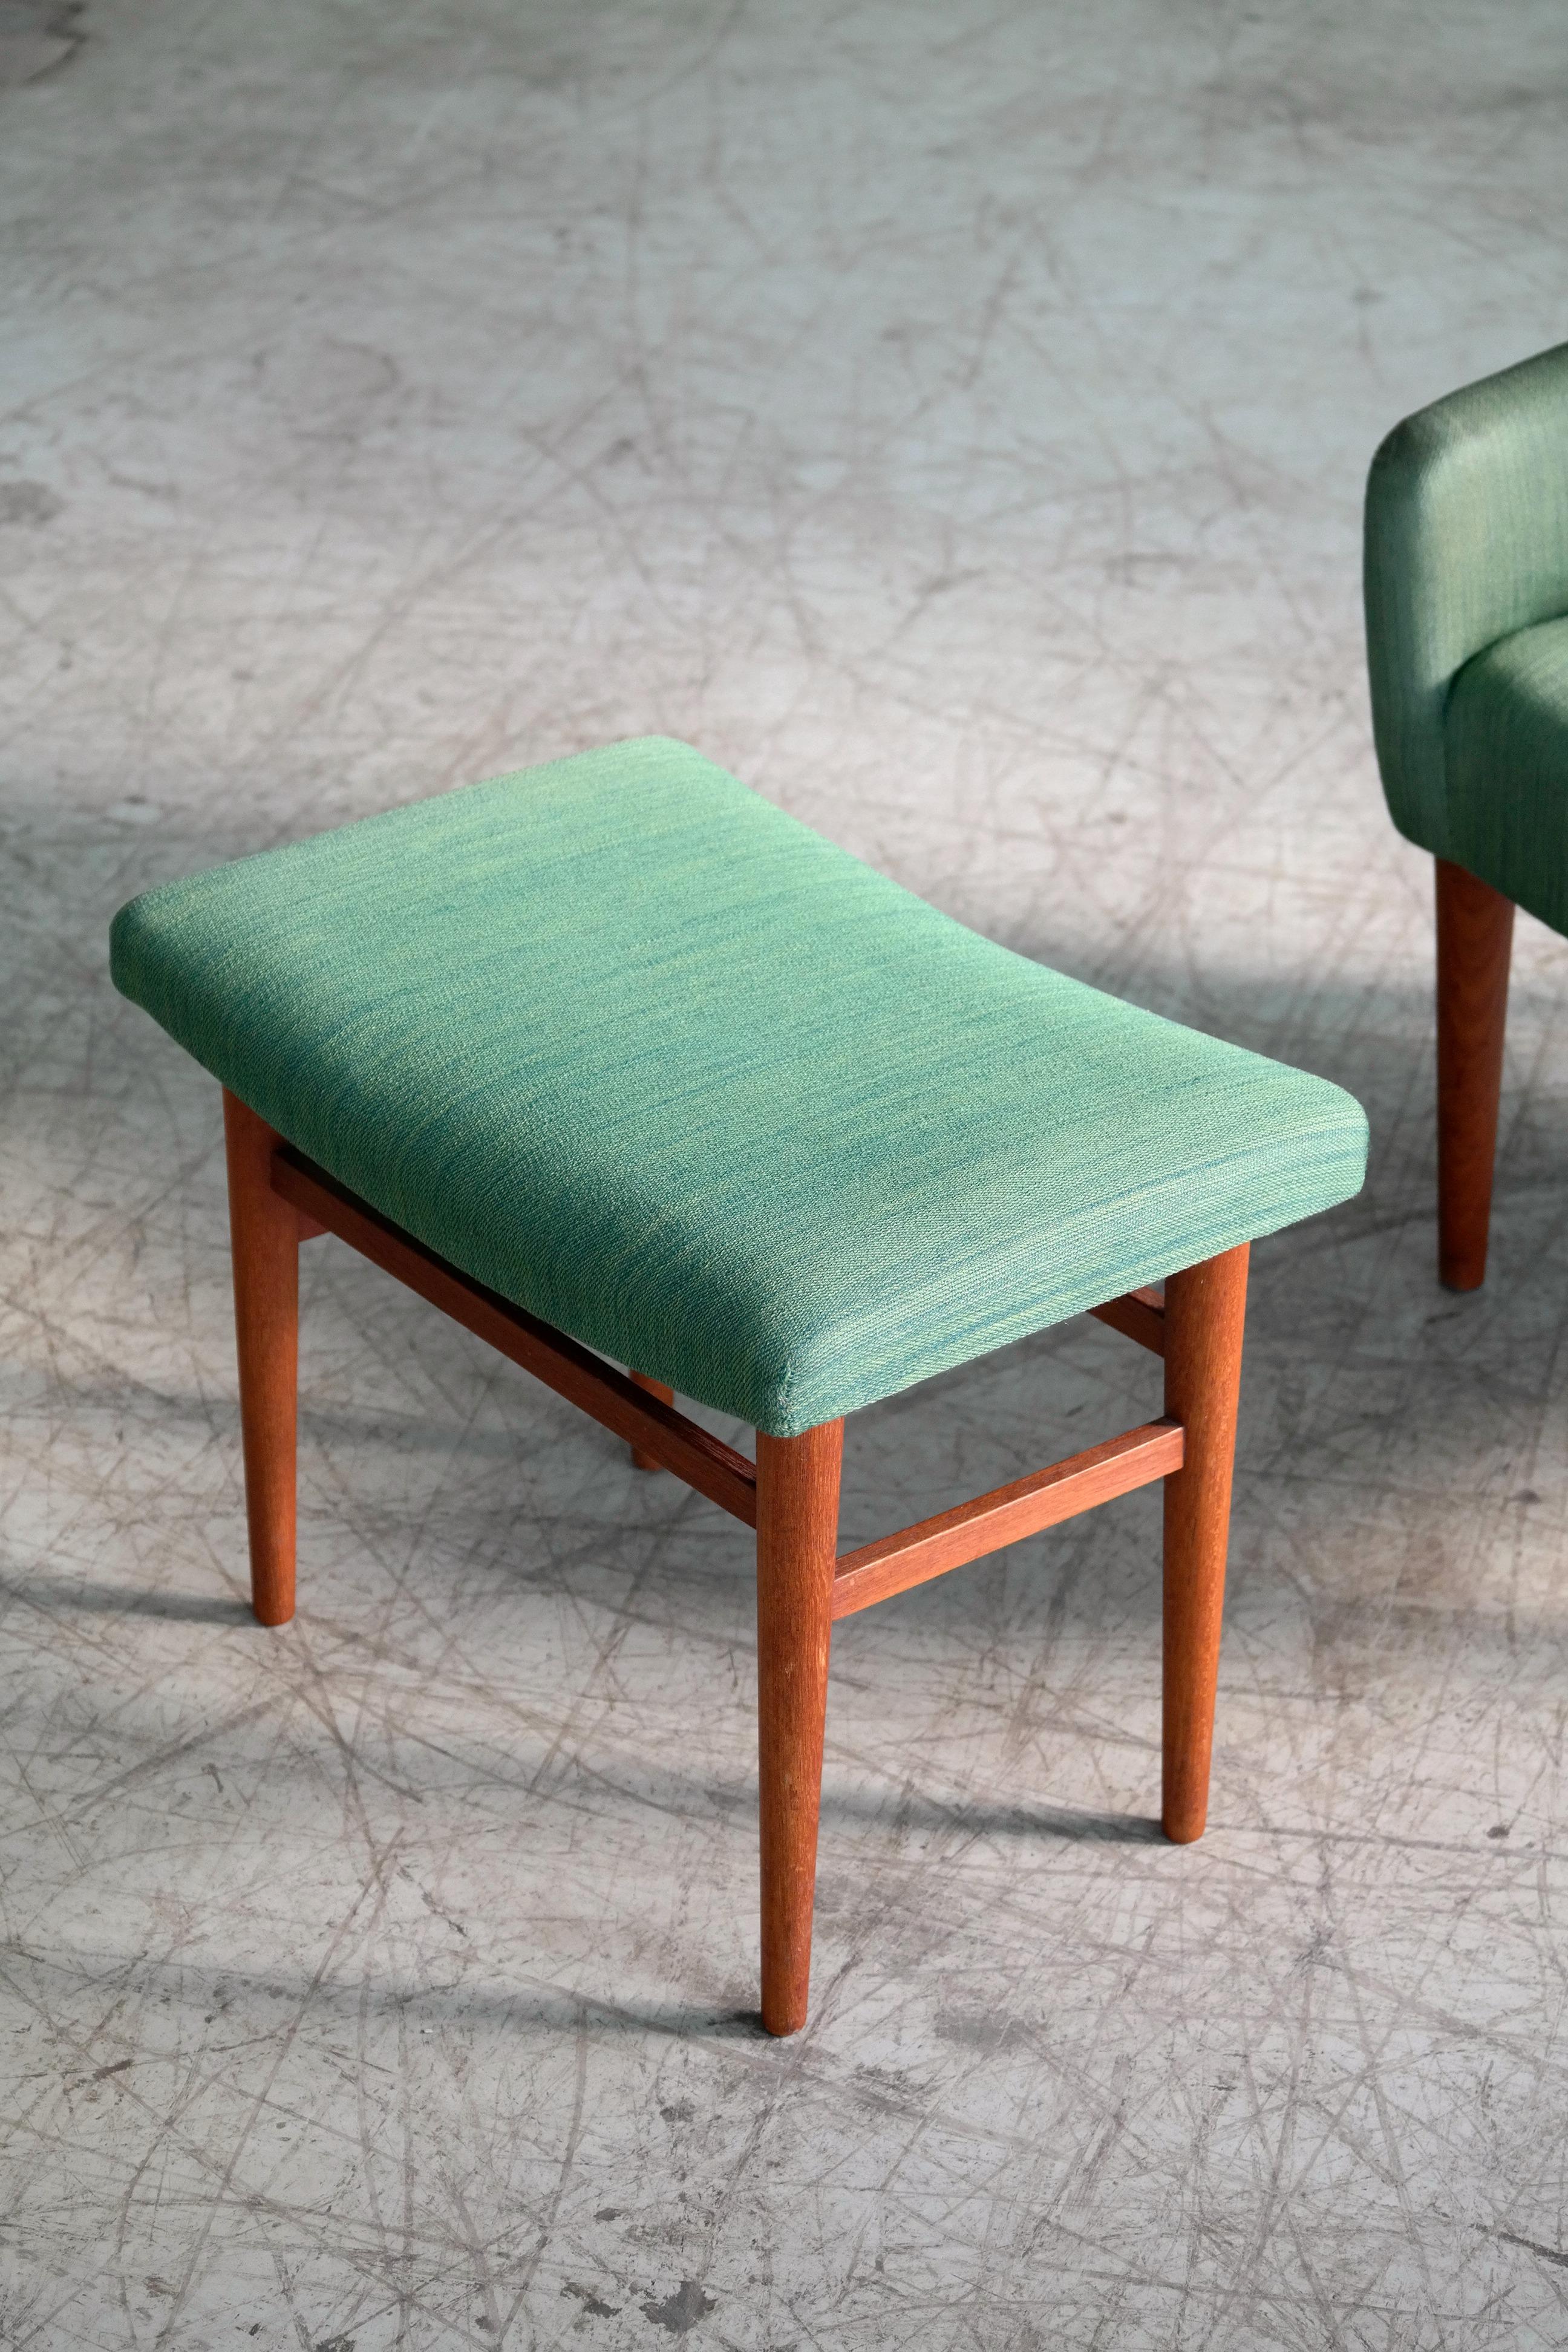 Danish 1950s Easy Chair with Footstool by Master Cabinet Maker Jacob Kjaer 1